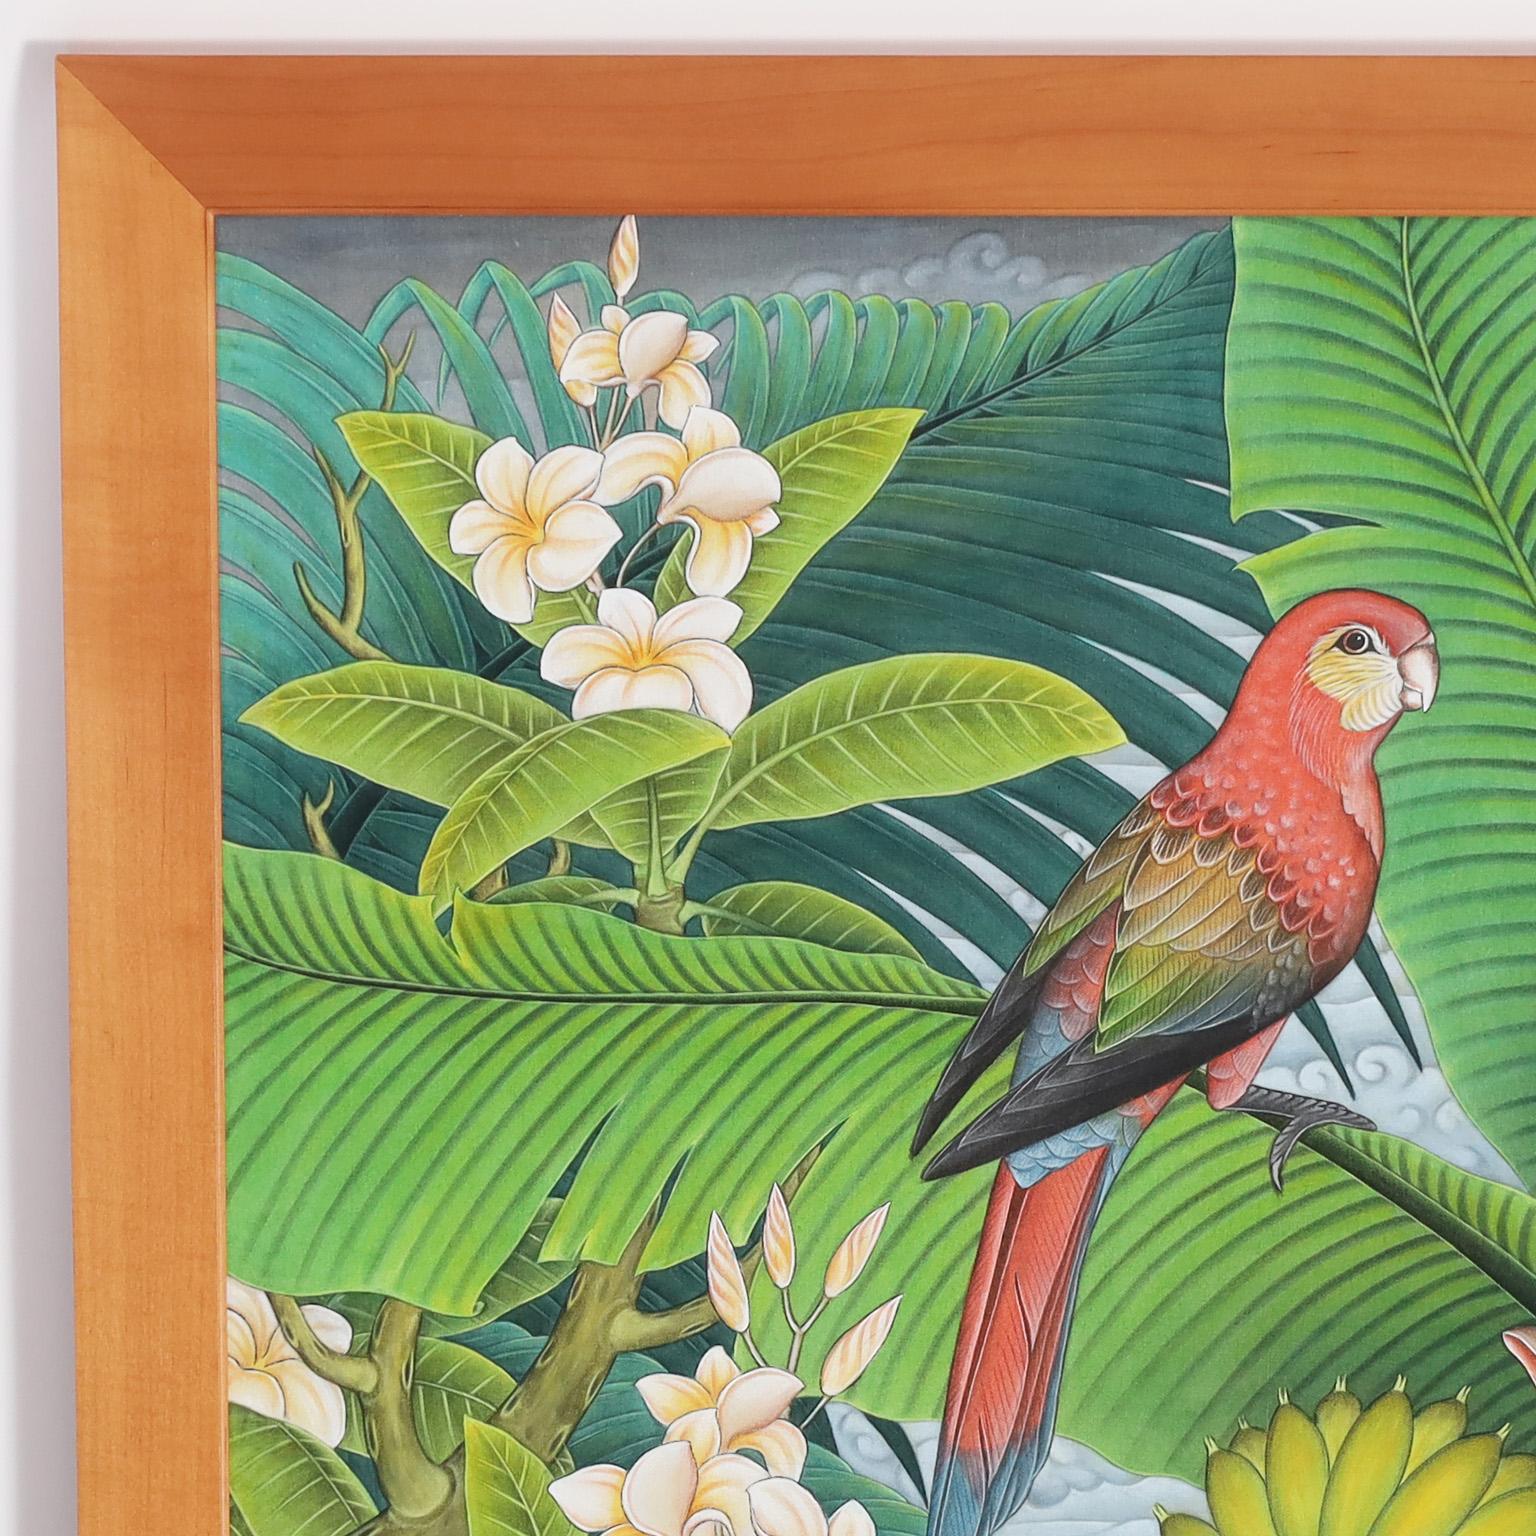 Acrylic painting on canvas of a lush tropical scene with exotic foliage, flowers, and a pair of parrots. Painted in Lanang Ubed Bali.